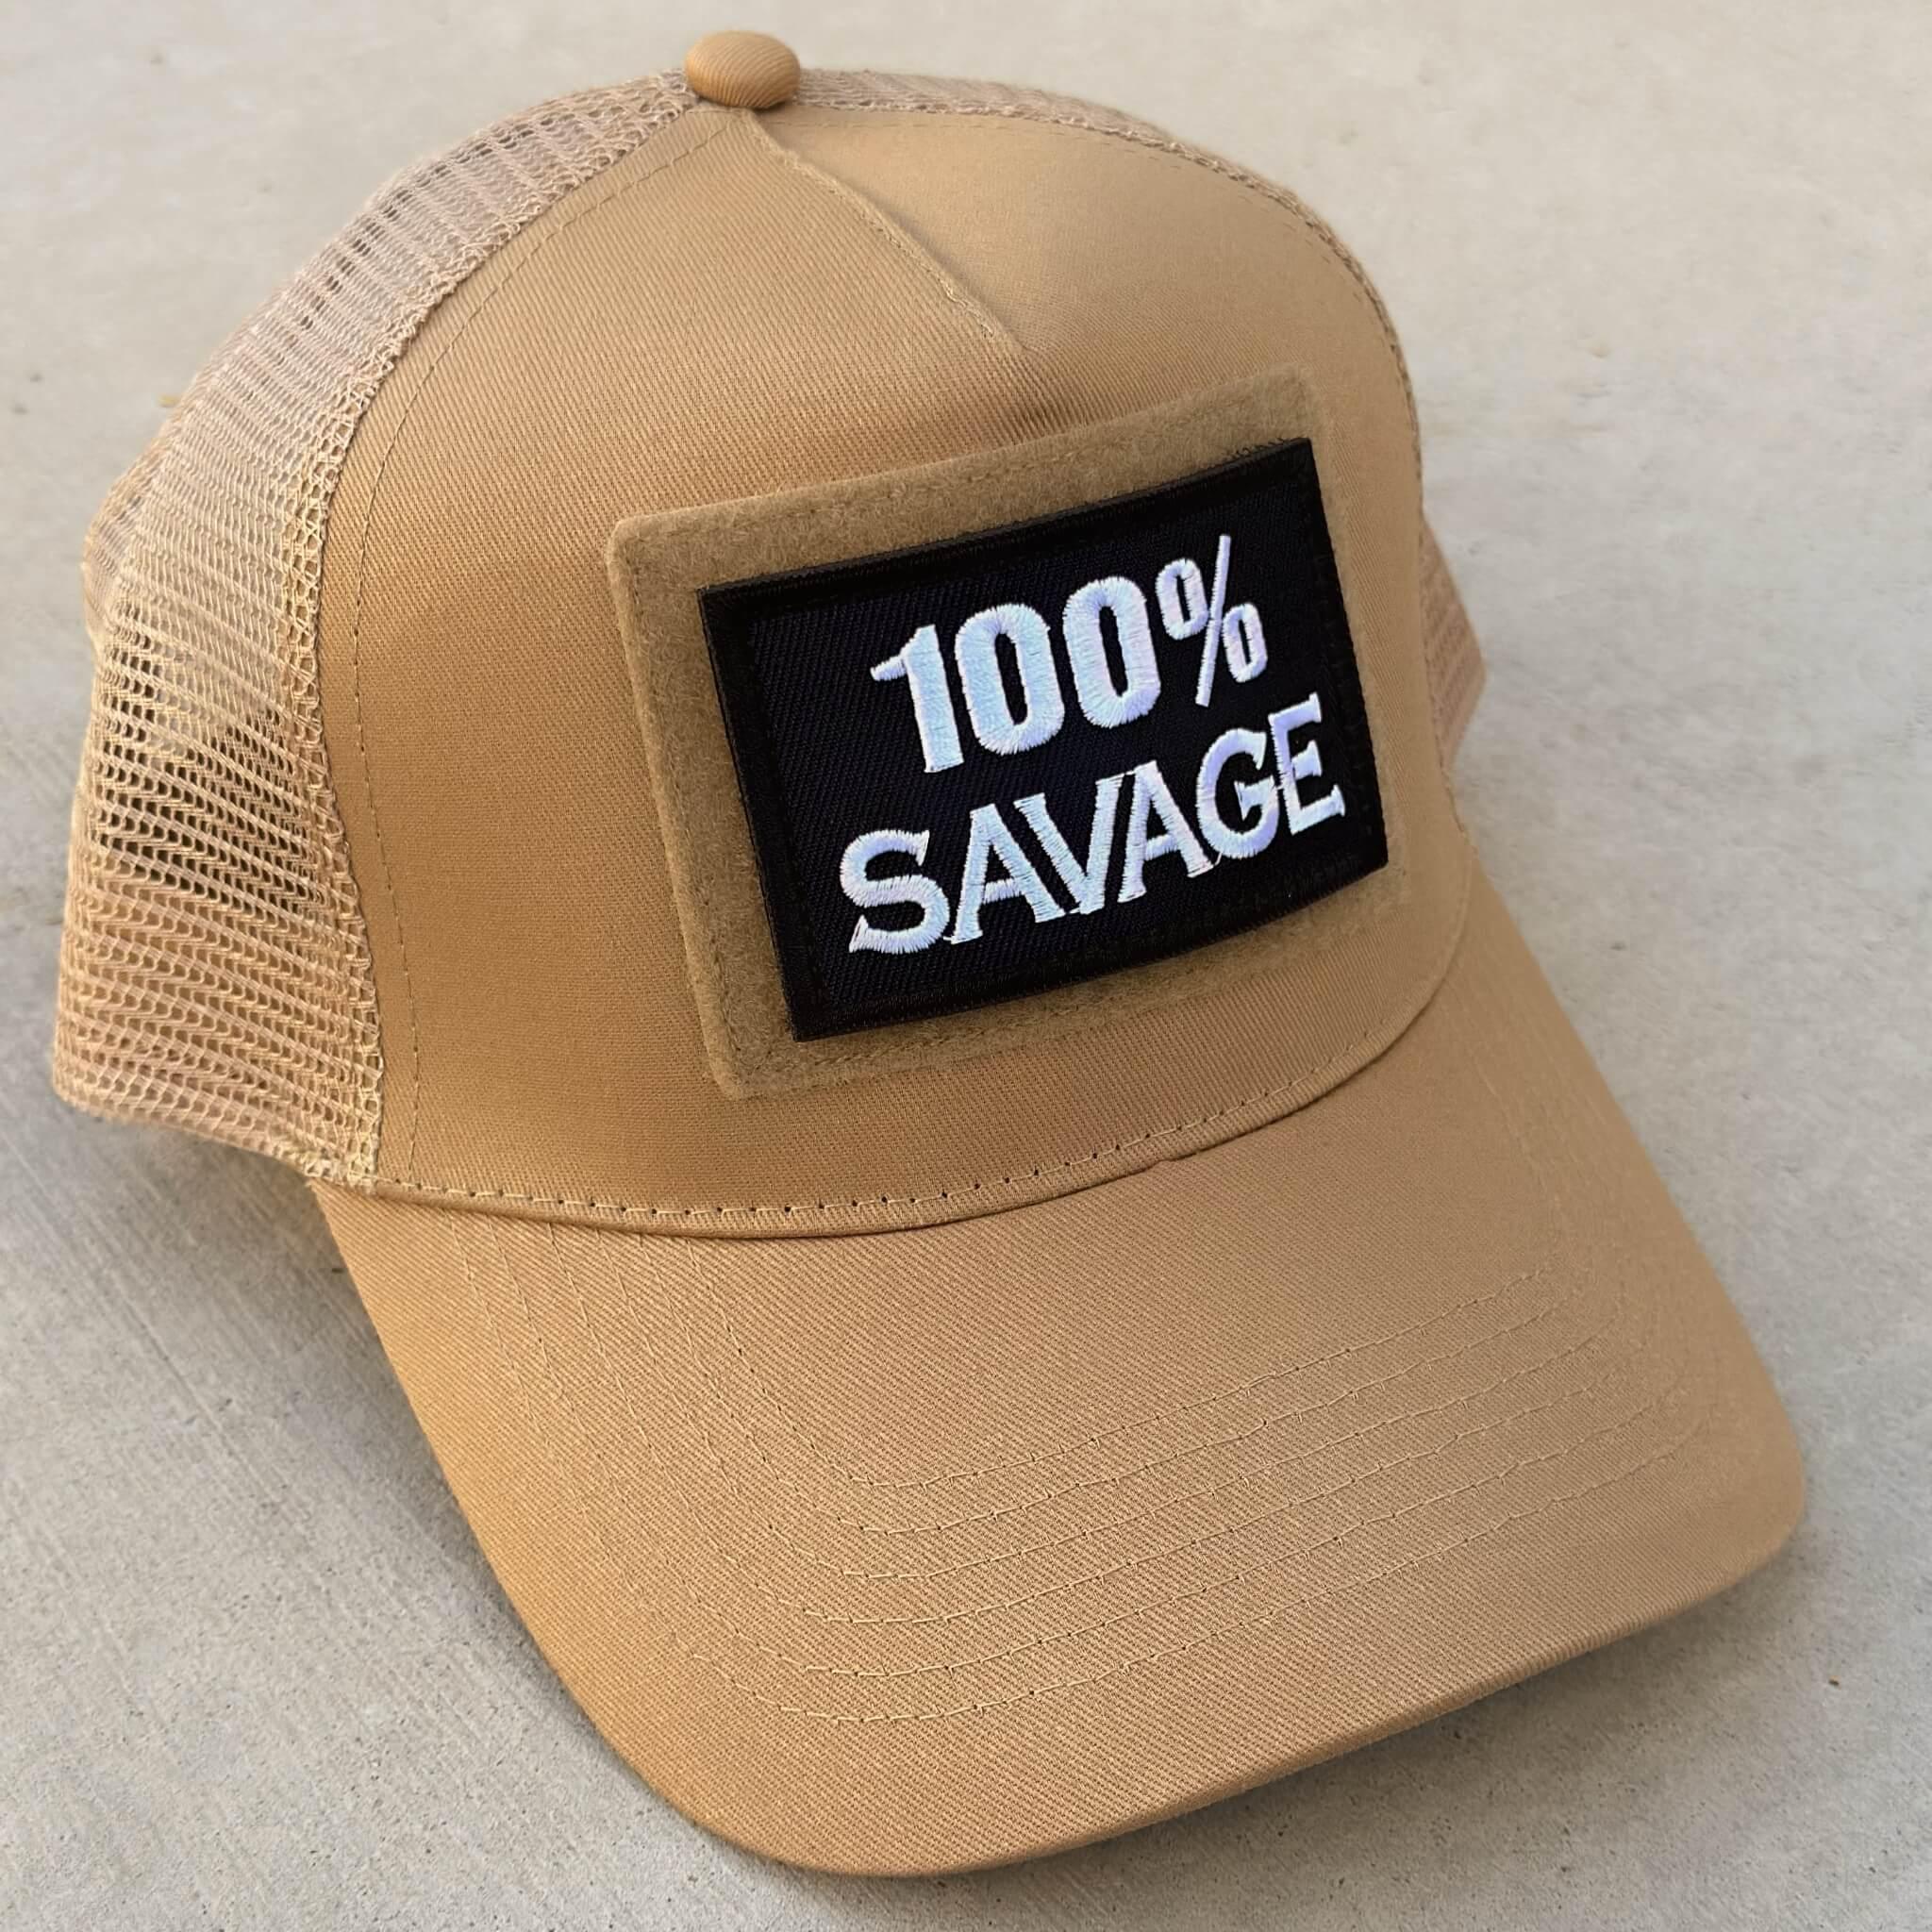 The trucker snapback cap in desert sand colors with 100% Savage patch attached